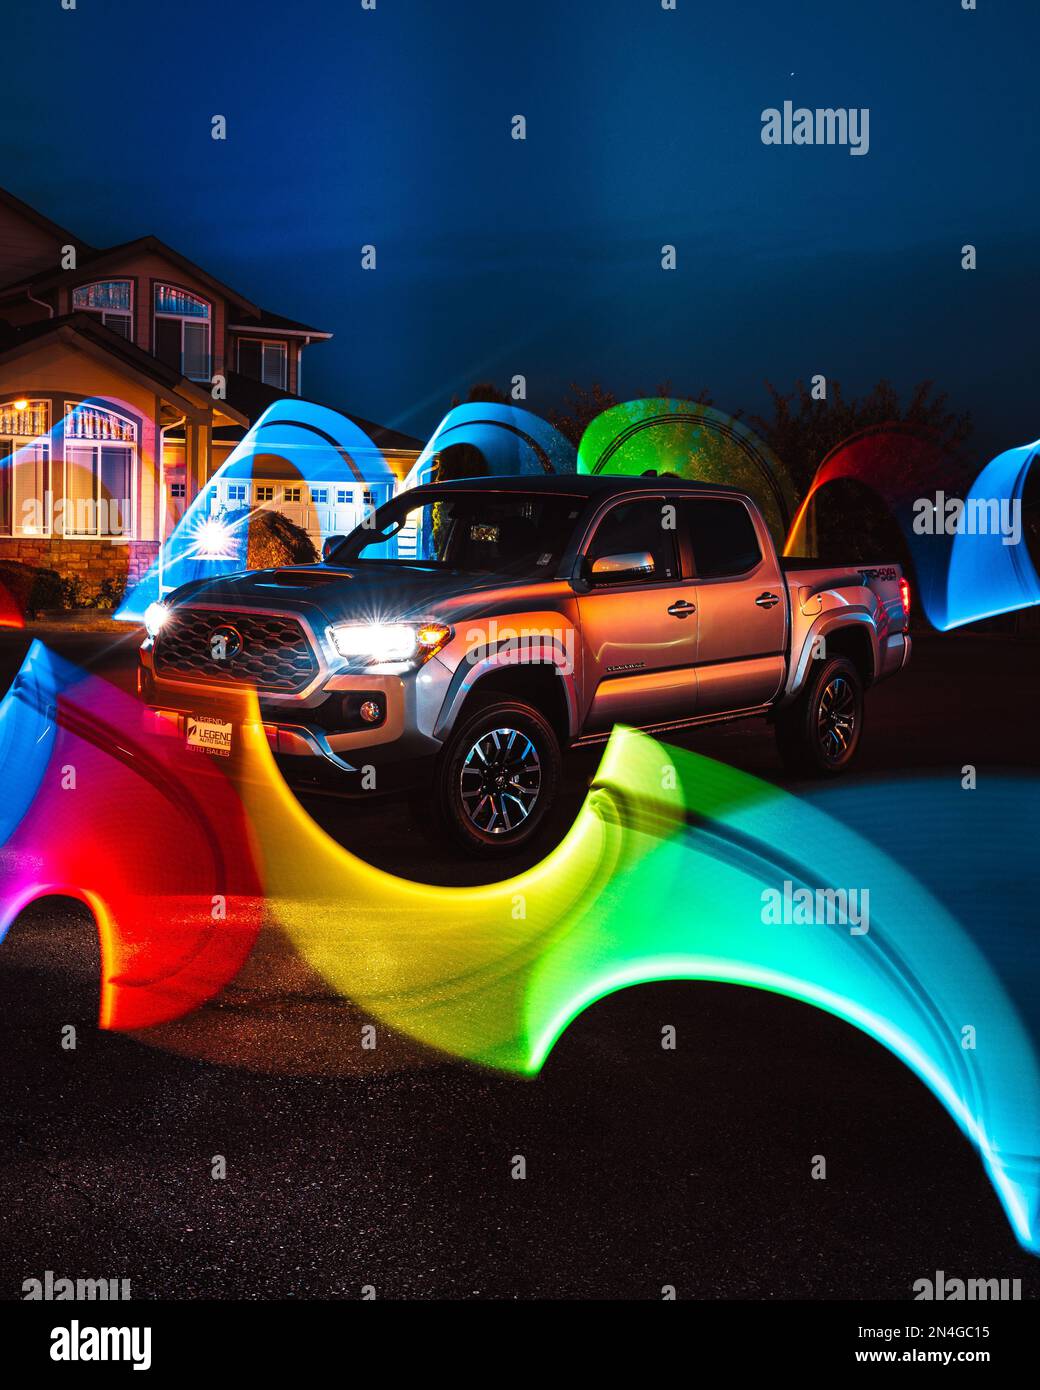 An incredible night long exposure shot of a Toyota Tacoma Stock Photo